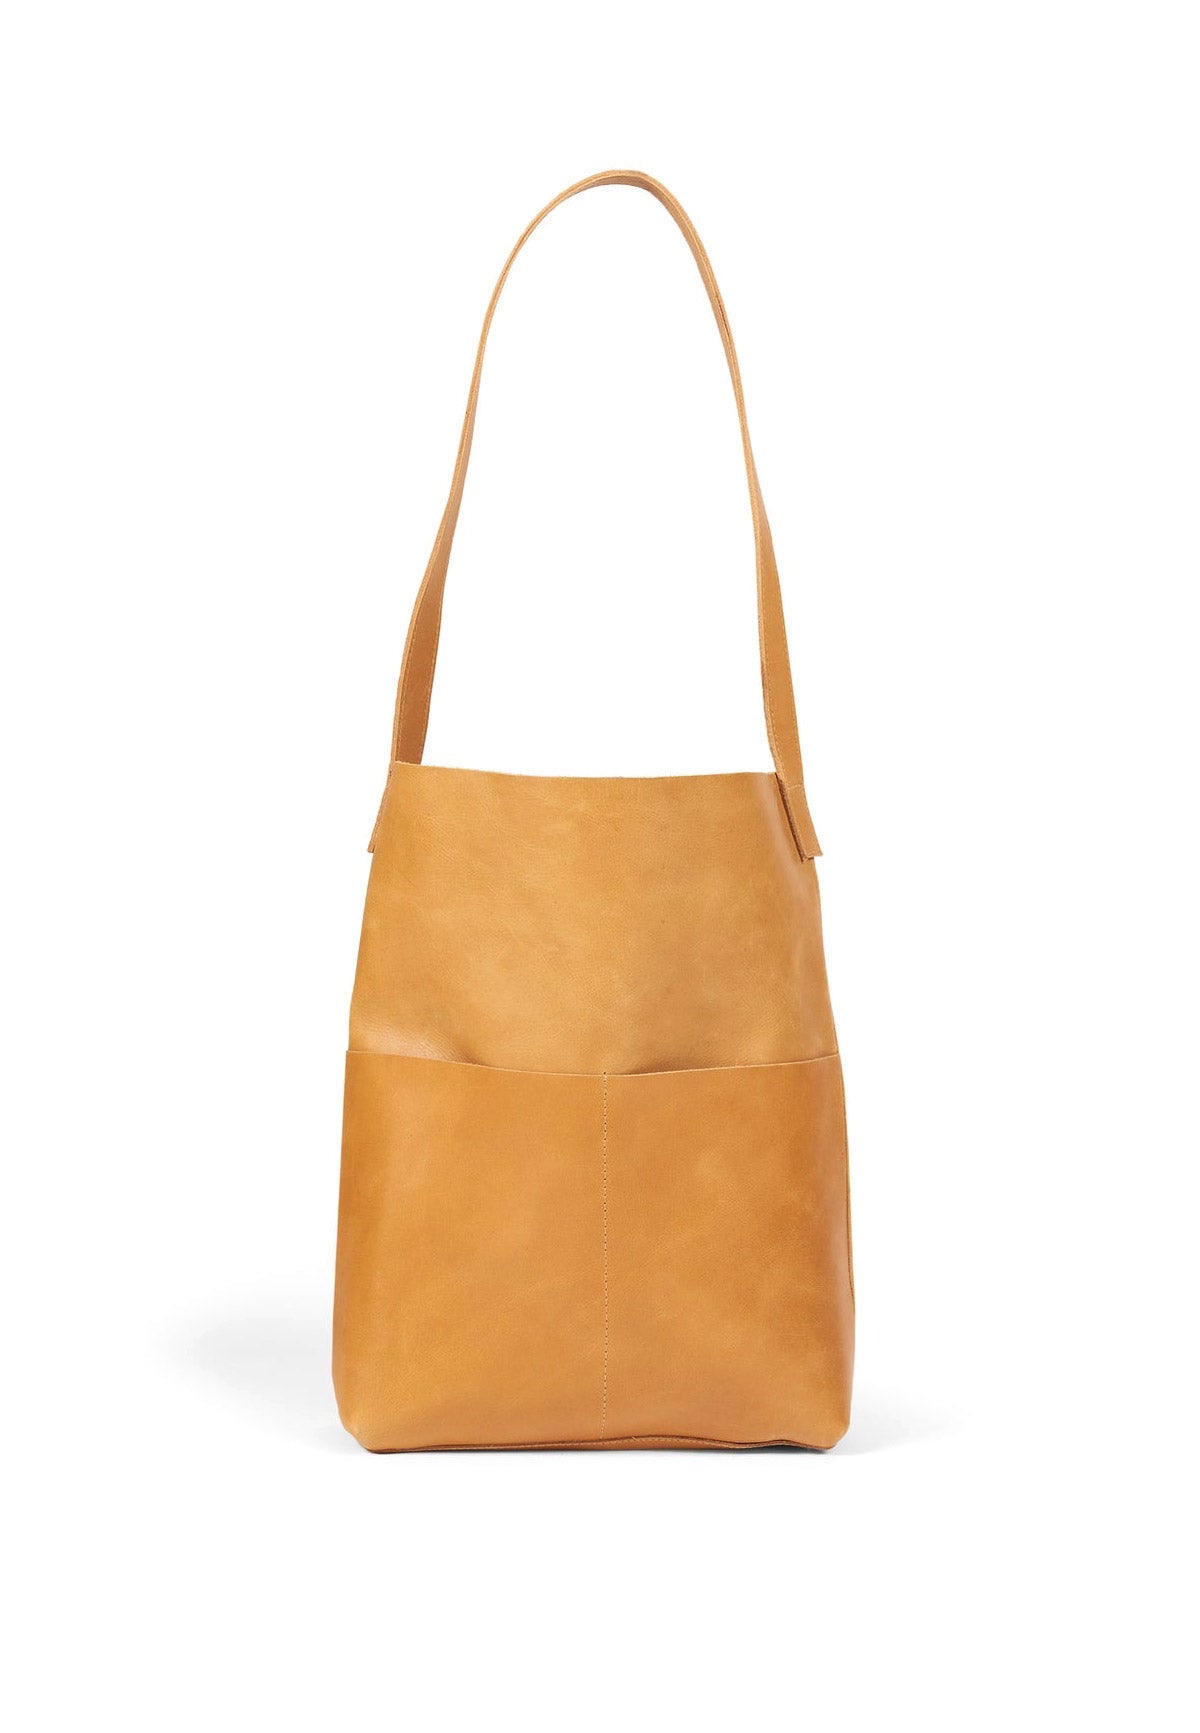 LEATHER TOTE BAG TWO POCKETS NATURAL